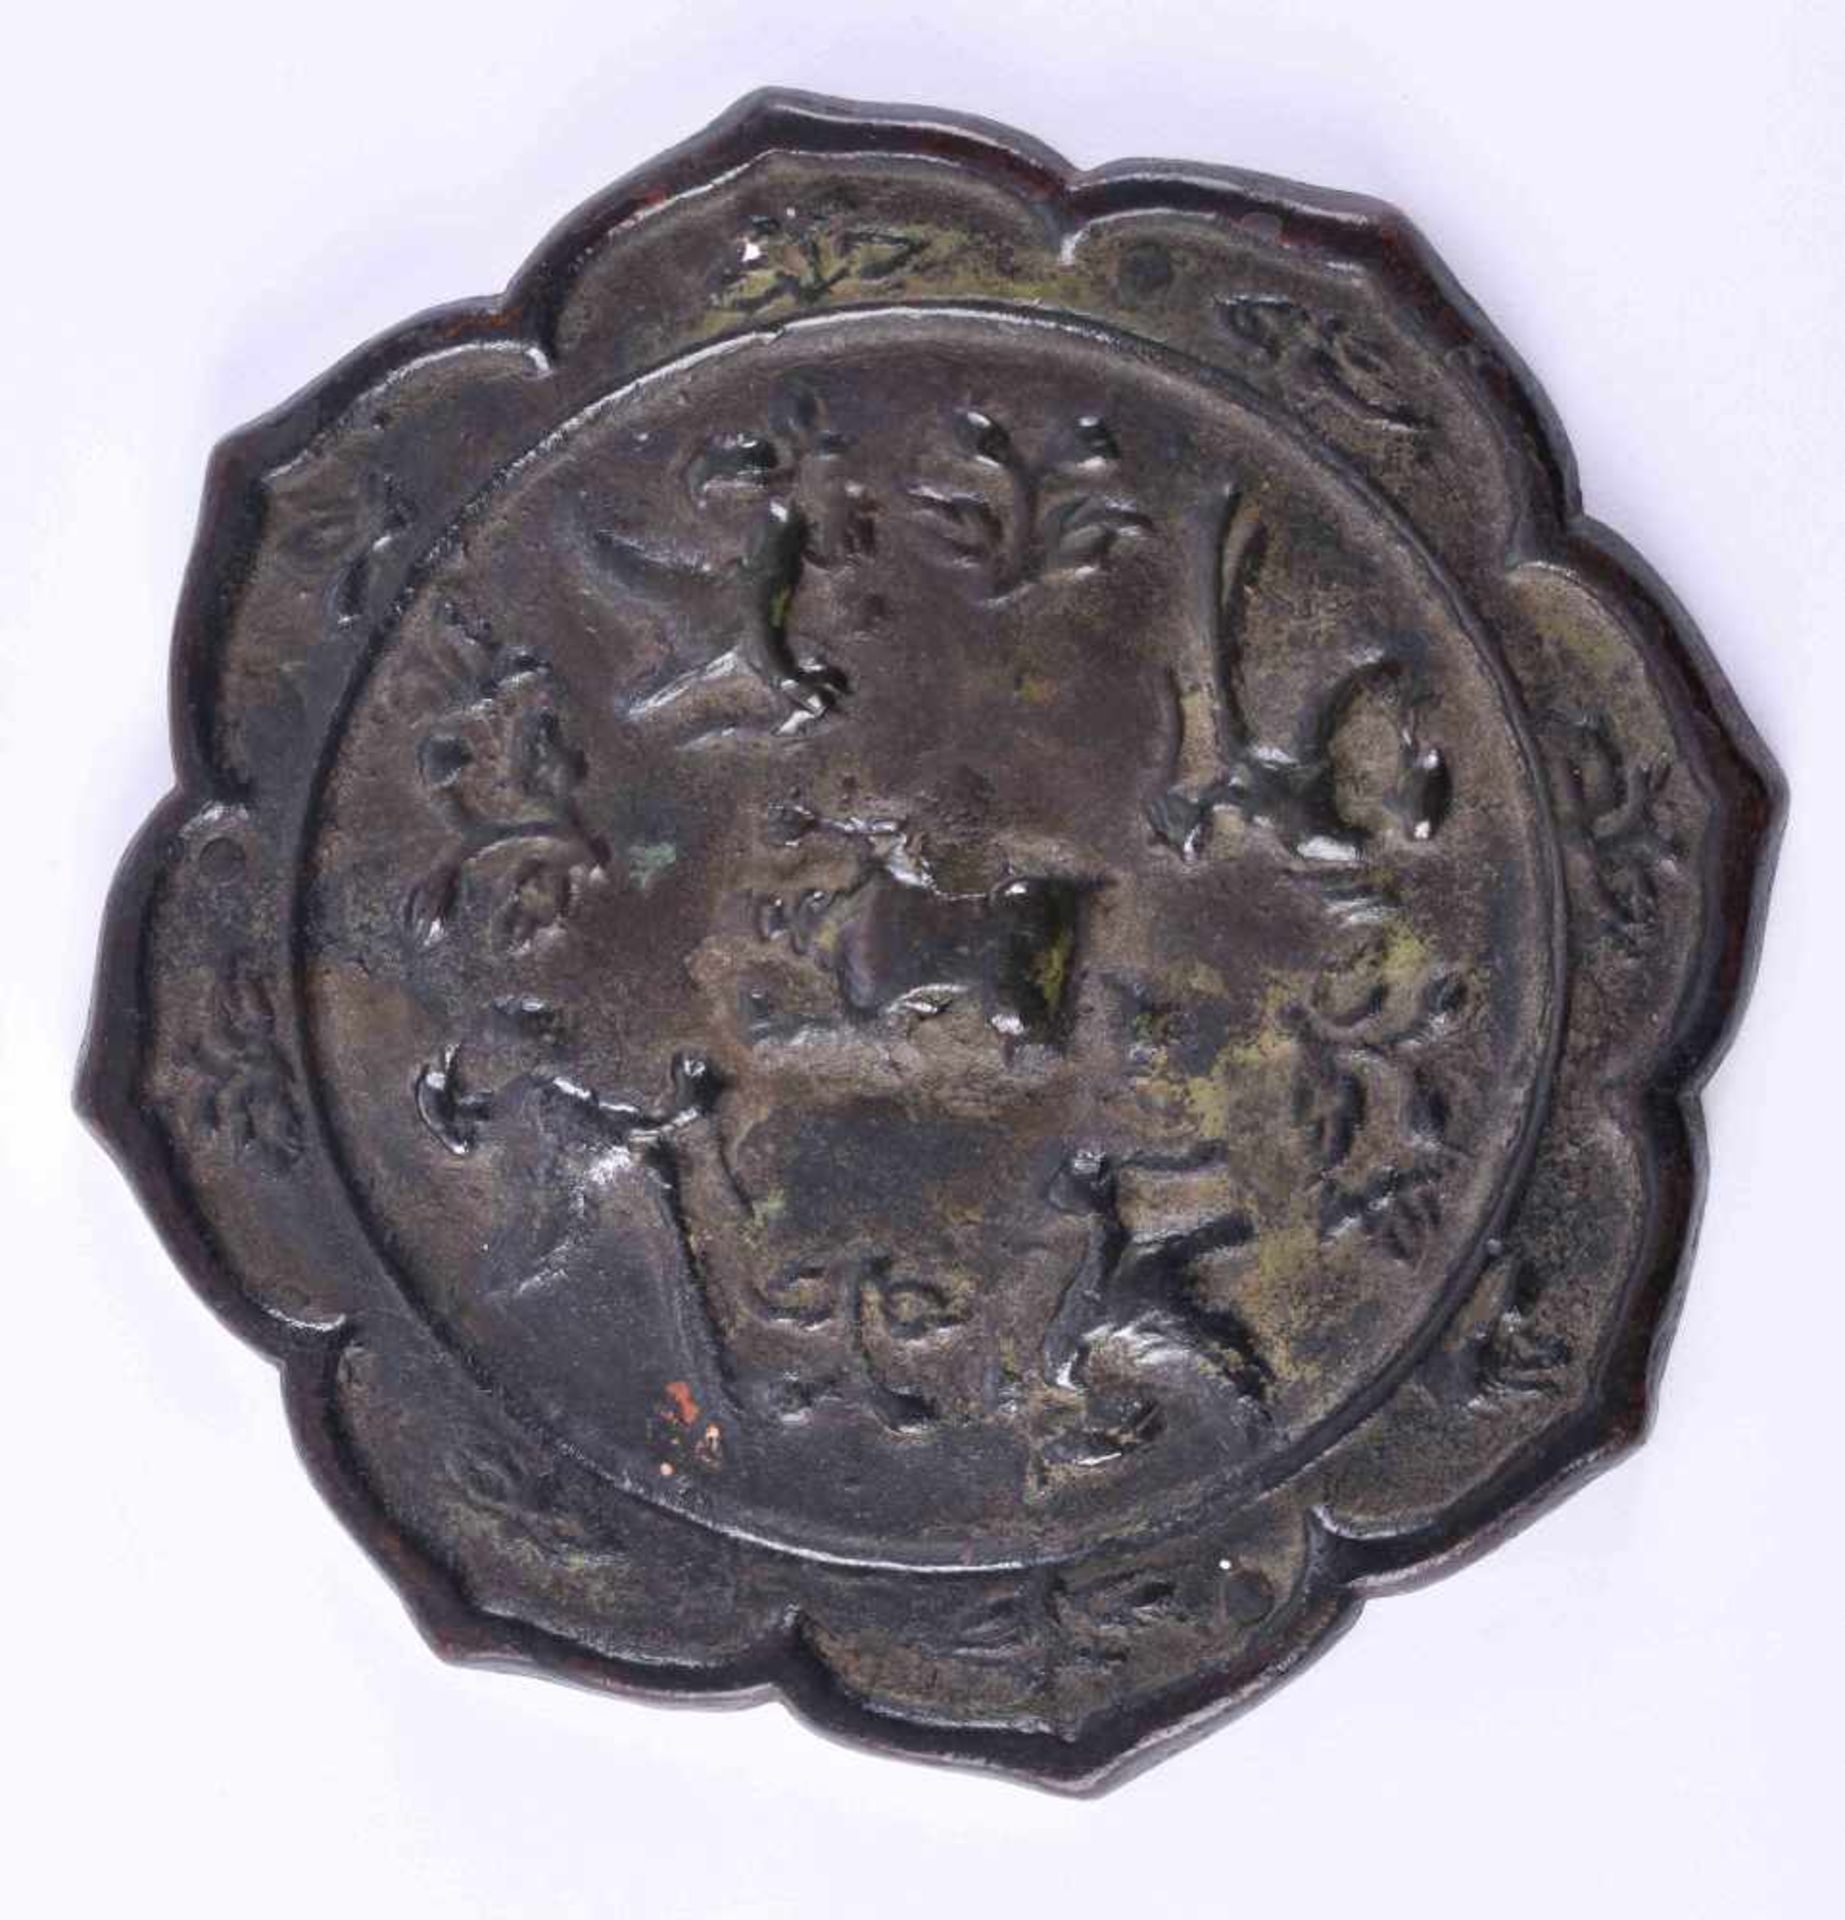 Mirror, China probably Song Dynasty (960 - 1279)